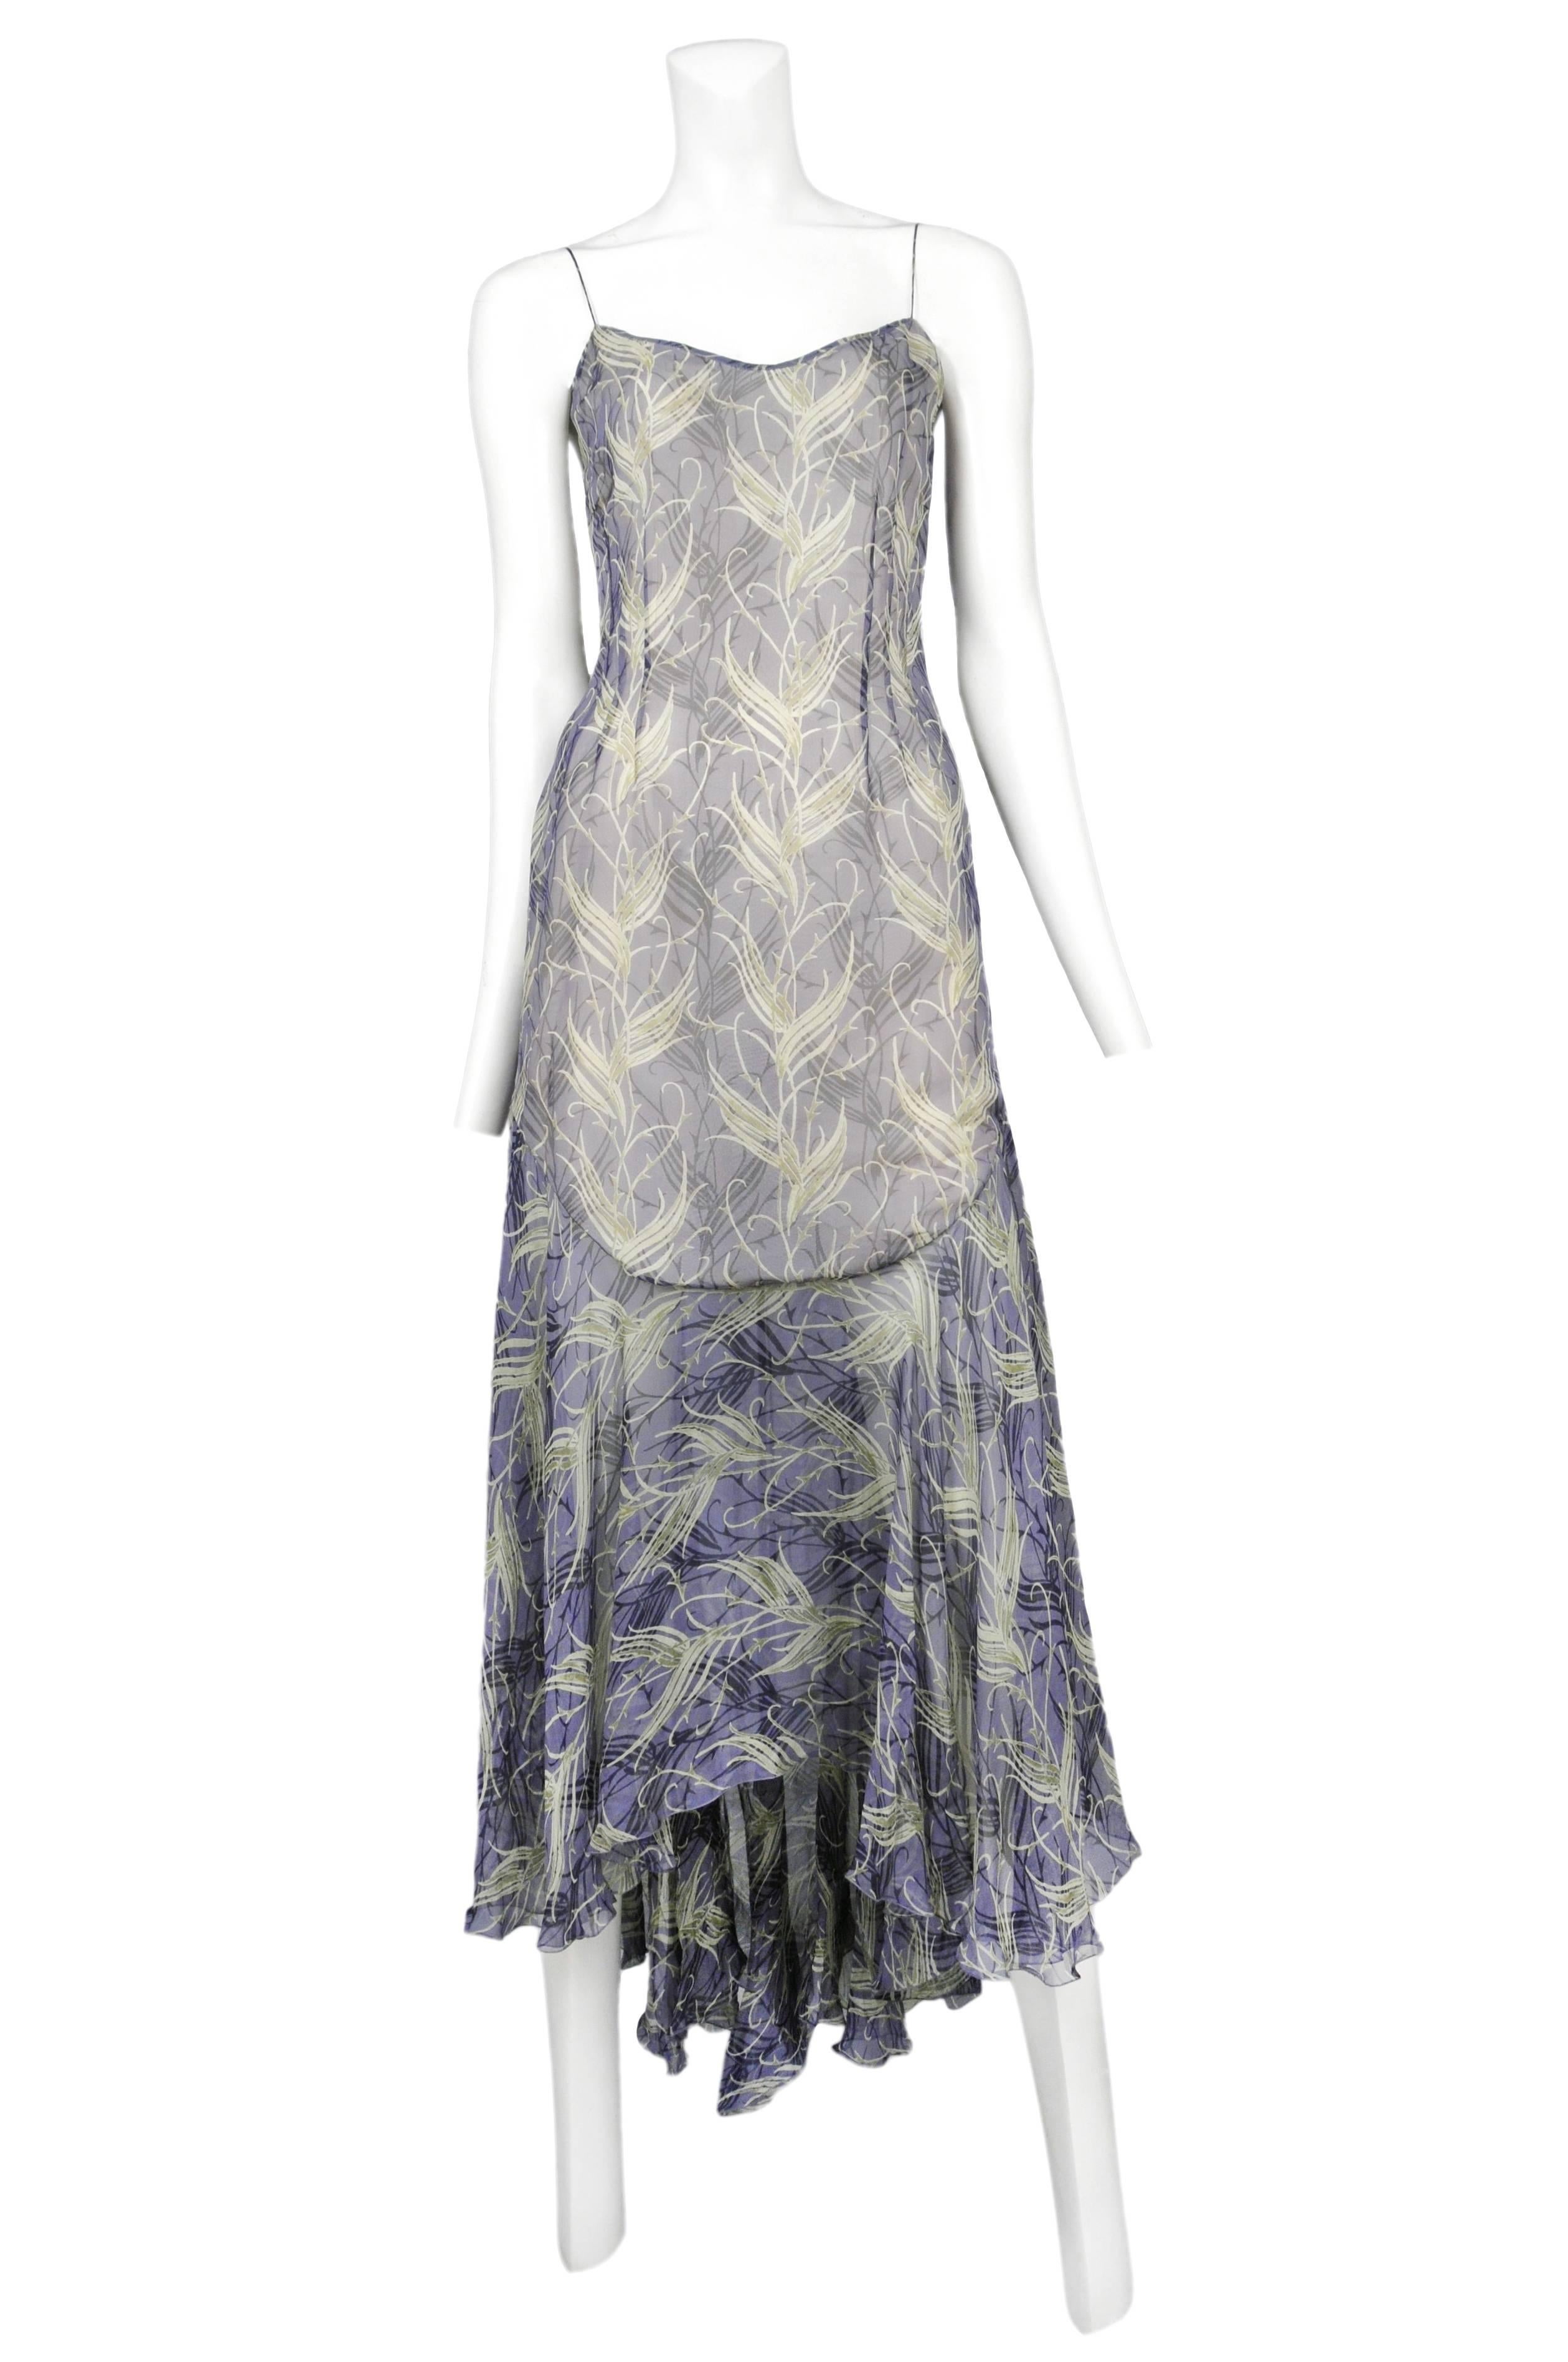 Vintage Stella McCartney for Chloe blue silk slip dress featuring a pastel green abstract feather print, a darted bodice, drop waist and spaghetti straps. Runway piece from the 1999 Spring / Summer Collection.
Please inquire for additional images.